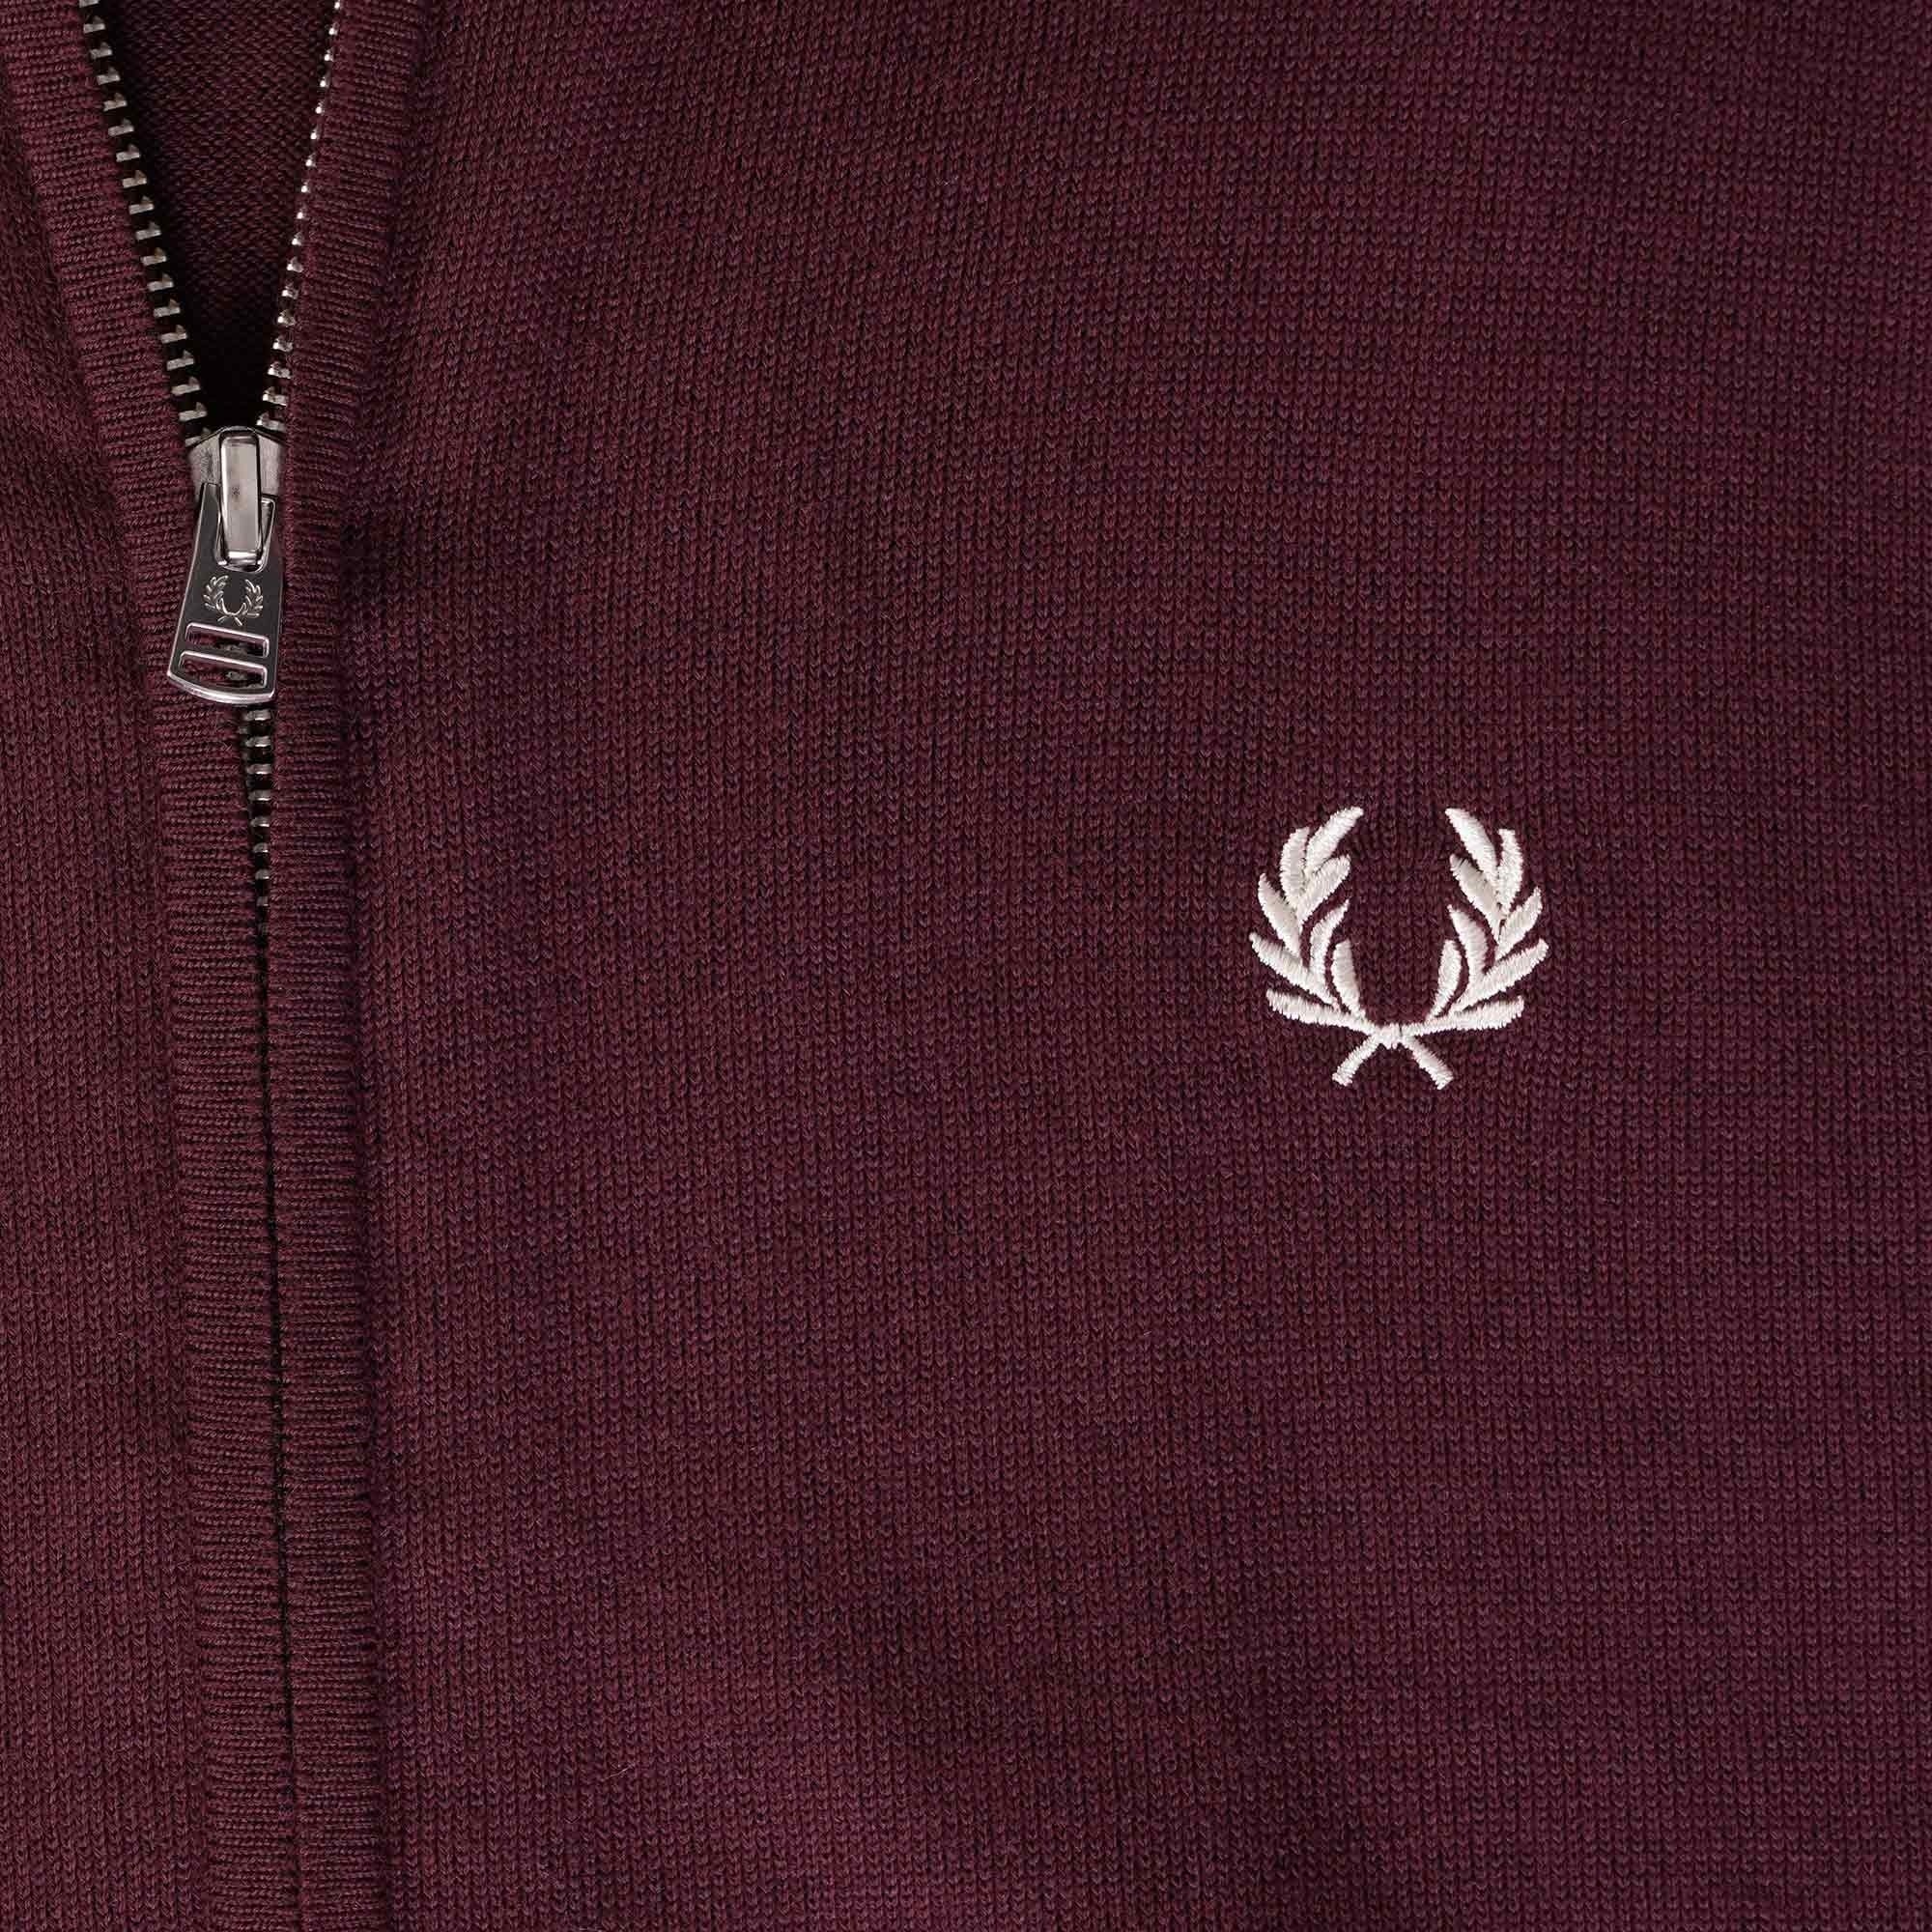 FRED PERRY AUTHENTIC CLASSIC ZIP THROUGH CARDIGAN BURGUNDY